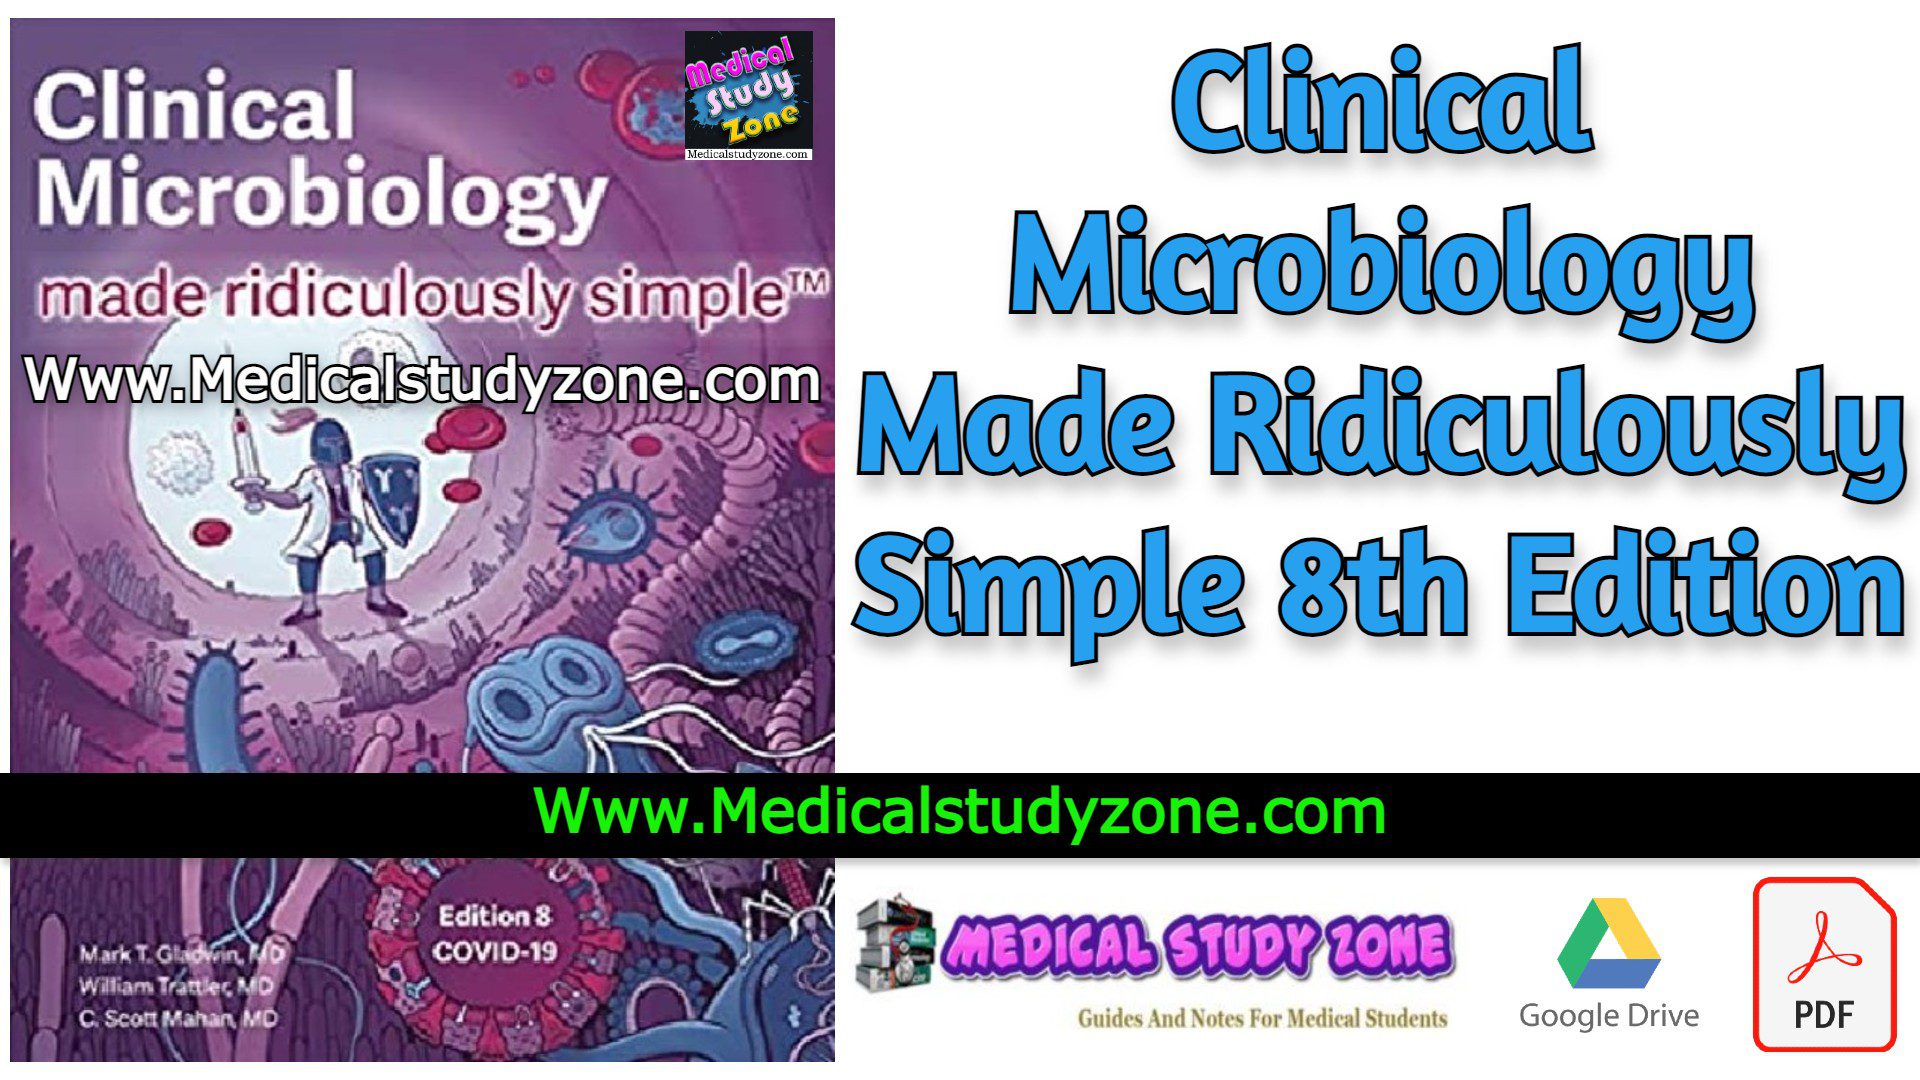 Clinical Microbiology Made Ridiculously Simple 8th Edition PDF Free Download [Google Drive]